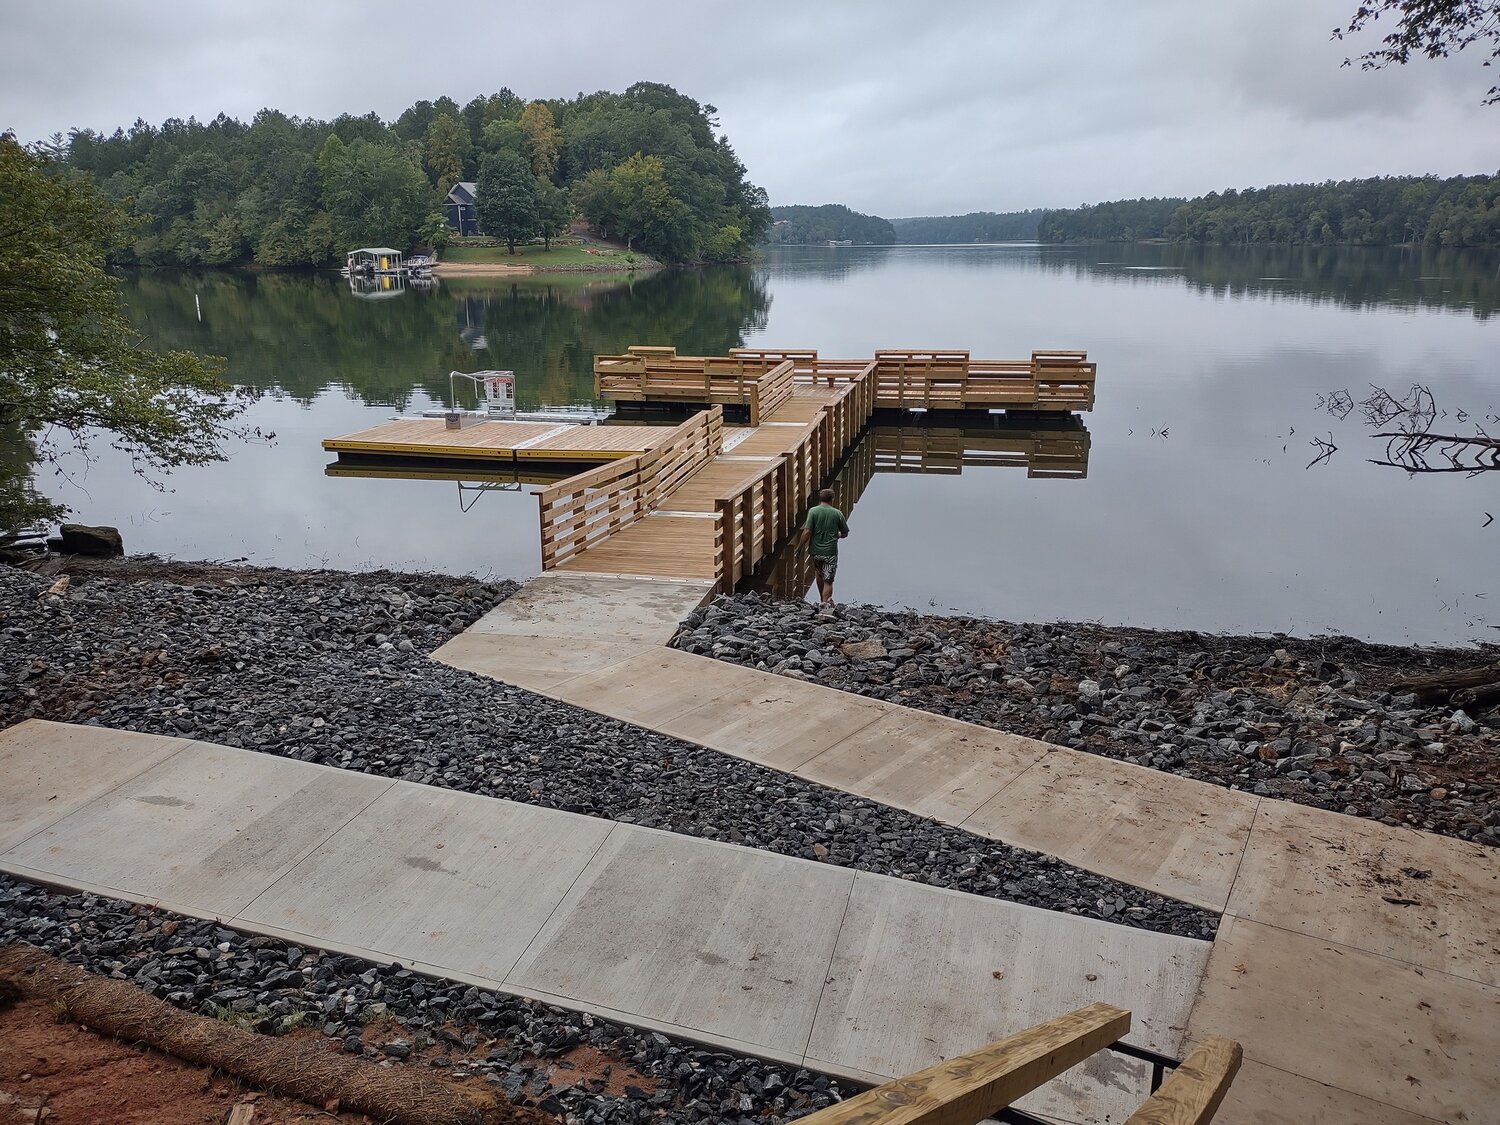 Work is nearly complete on the new kayak launch and fishing pier at Lakeside Park in Valdese. An official ribbon cutting for the new launch and pier, located on the south bank of Lake Rhodhiss, will be held Thursday, Sept. 28, at 1 p.m.